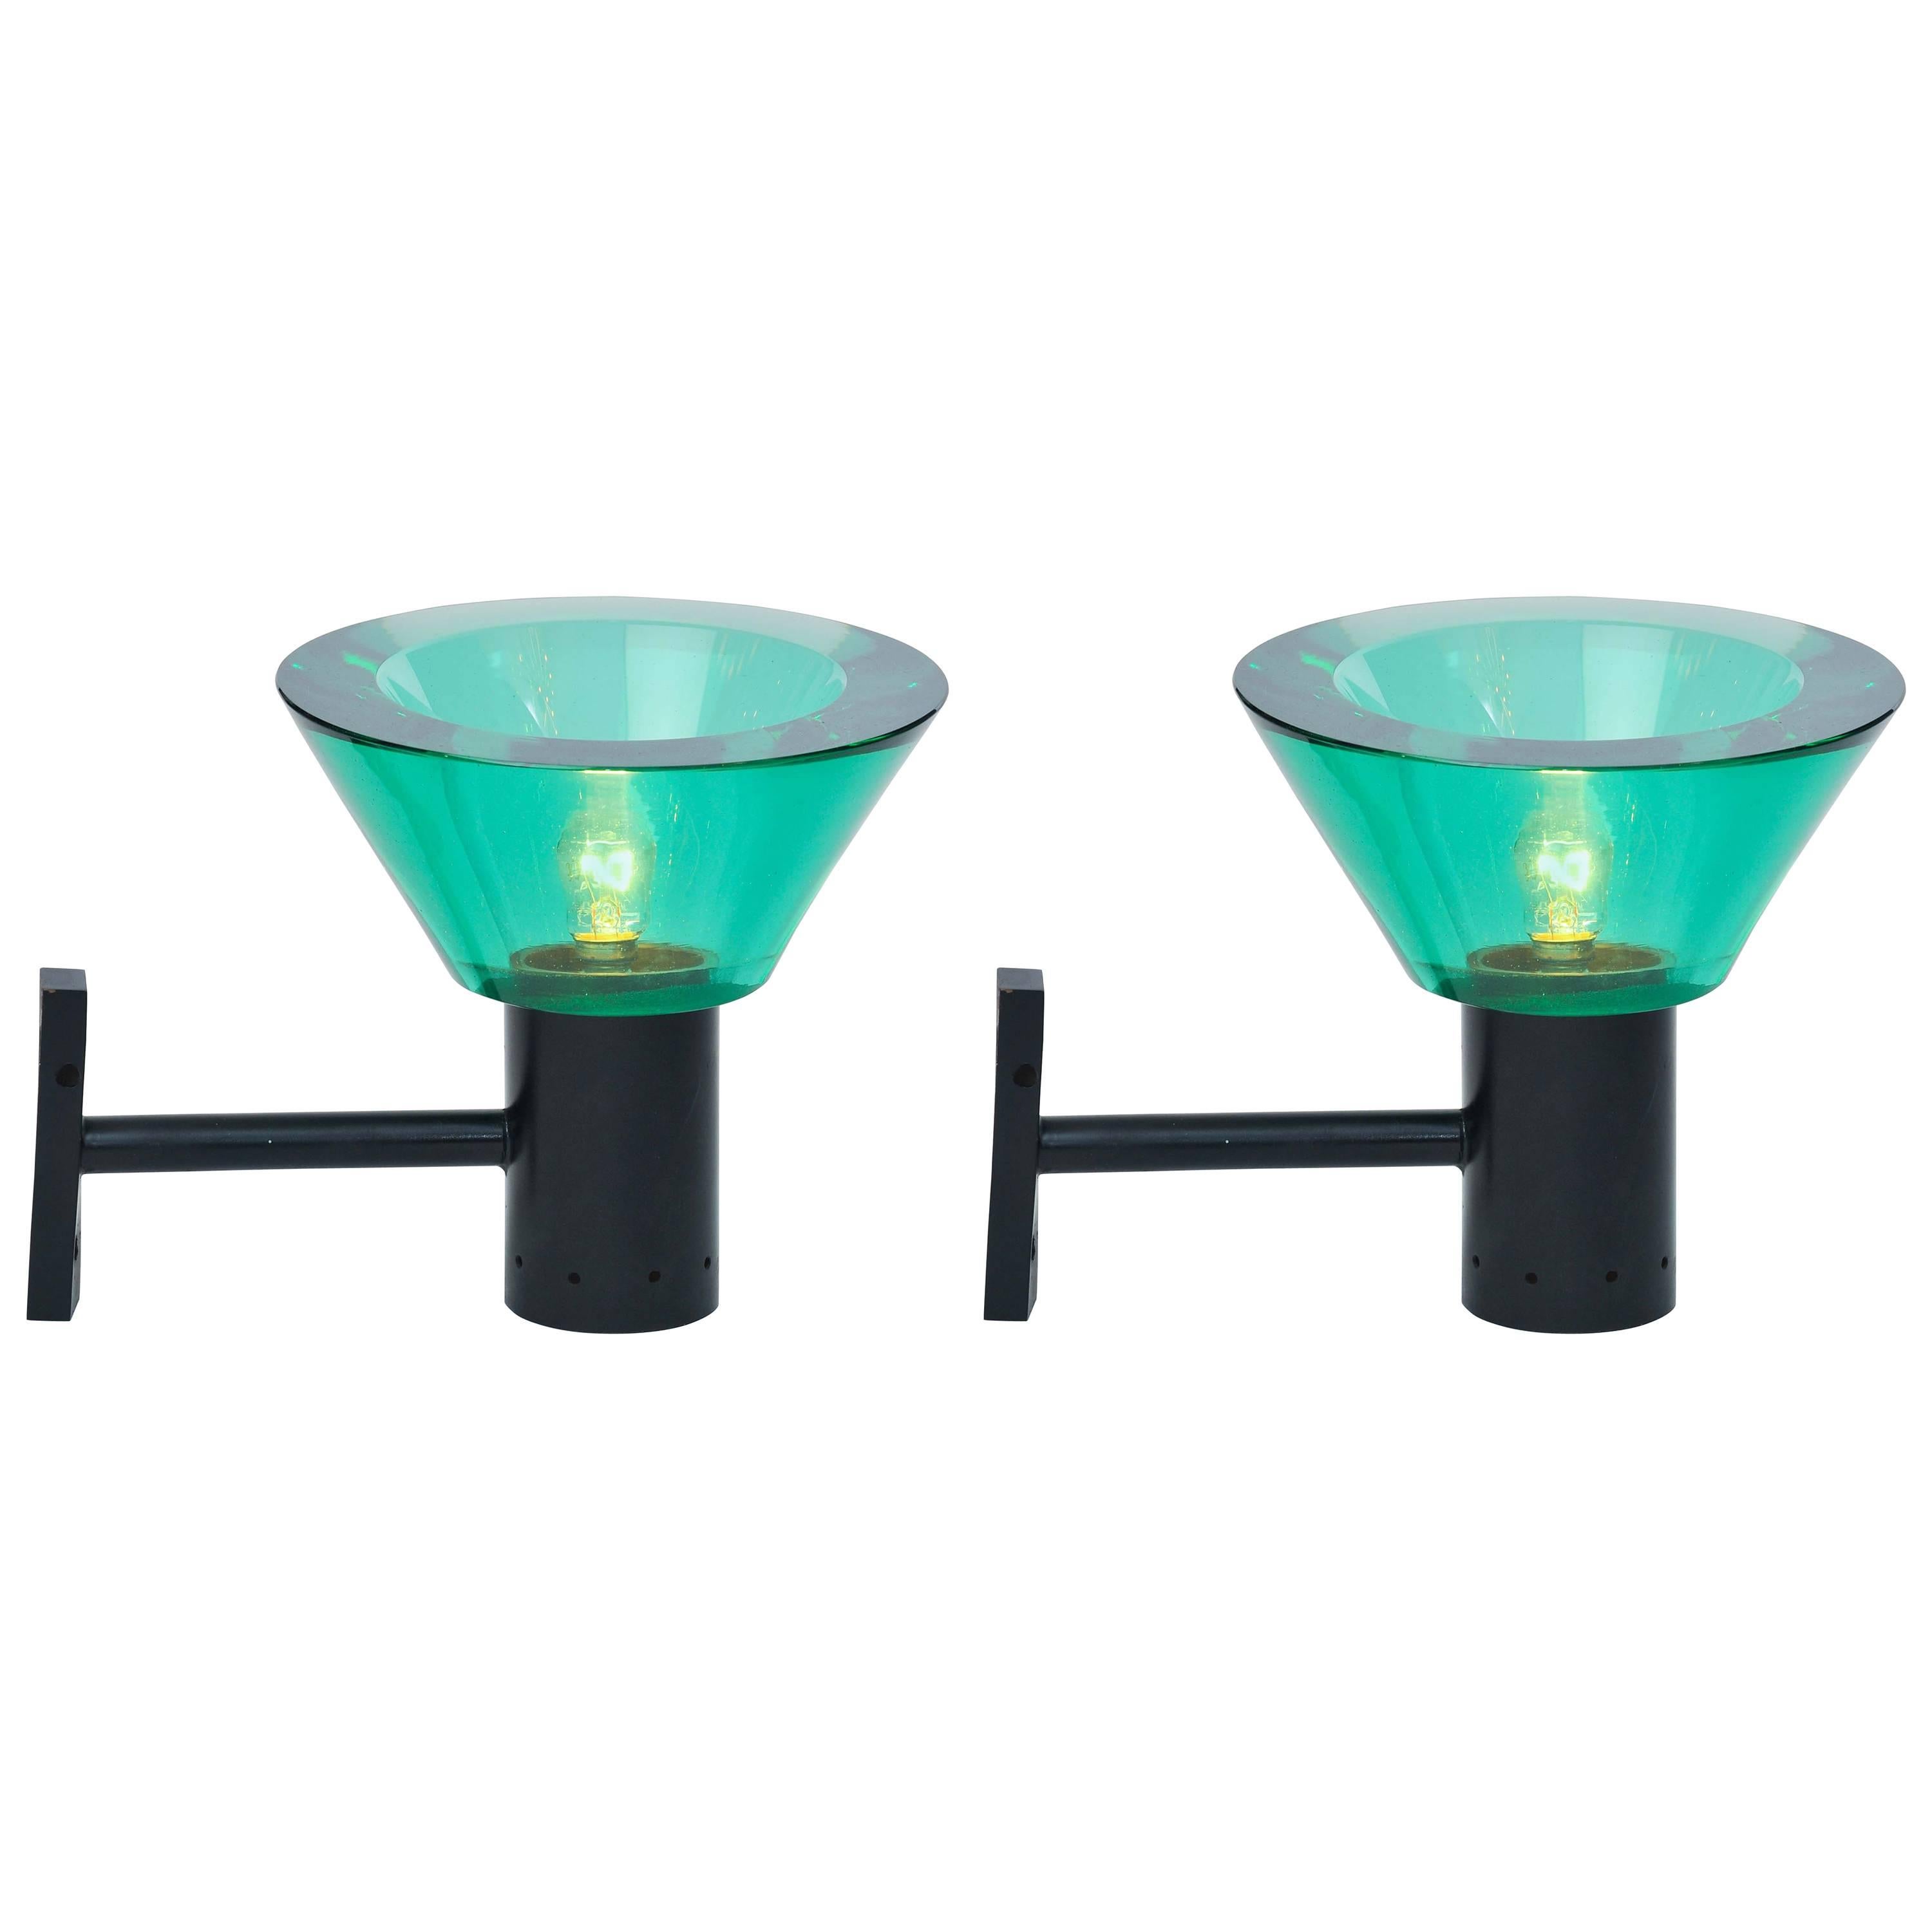 Pair of Seguso Wall Lamps with Emerald Green Glass Shades, circa 1970 For Sale